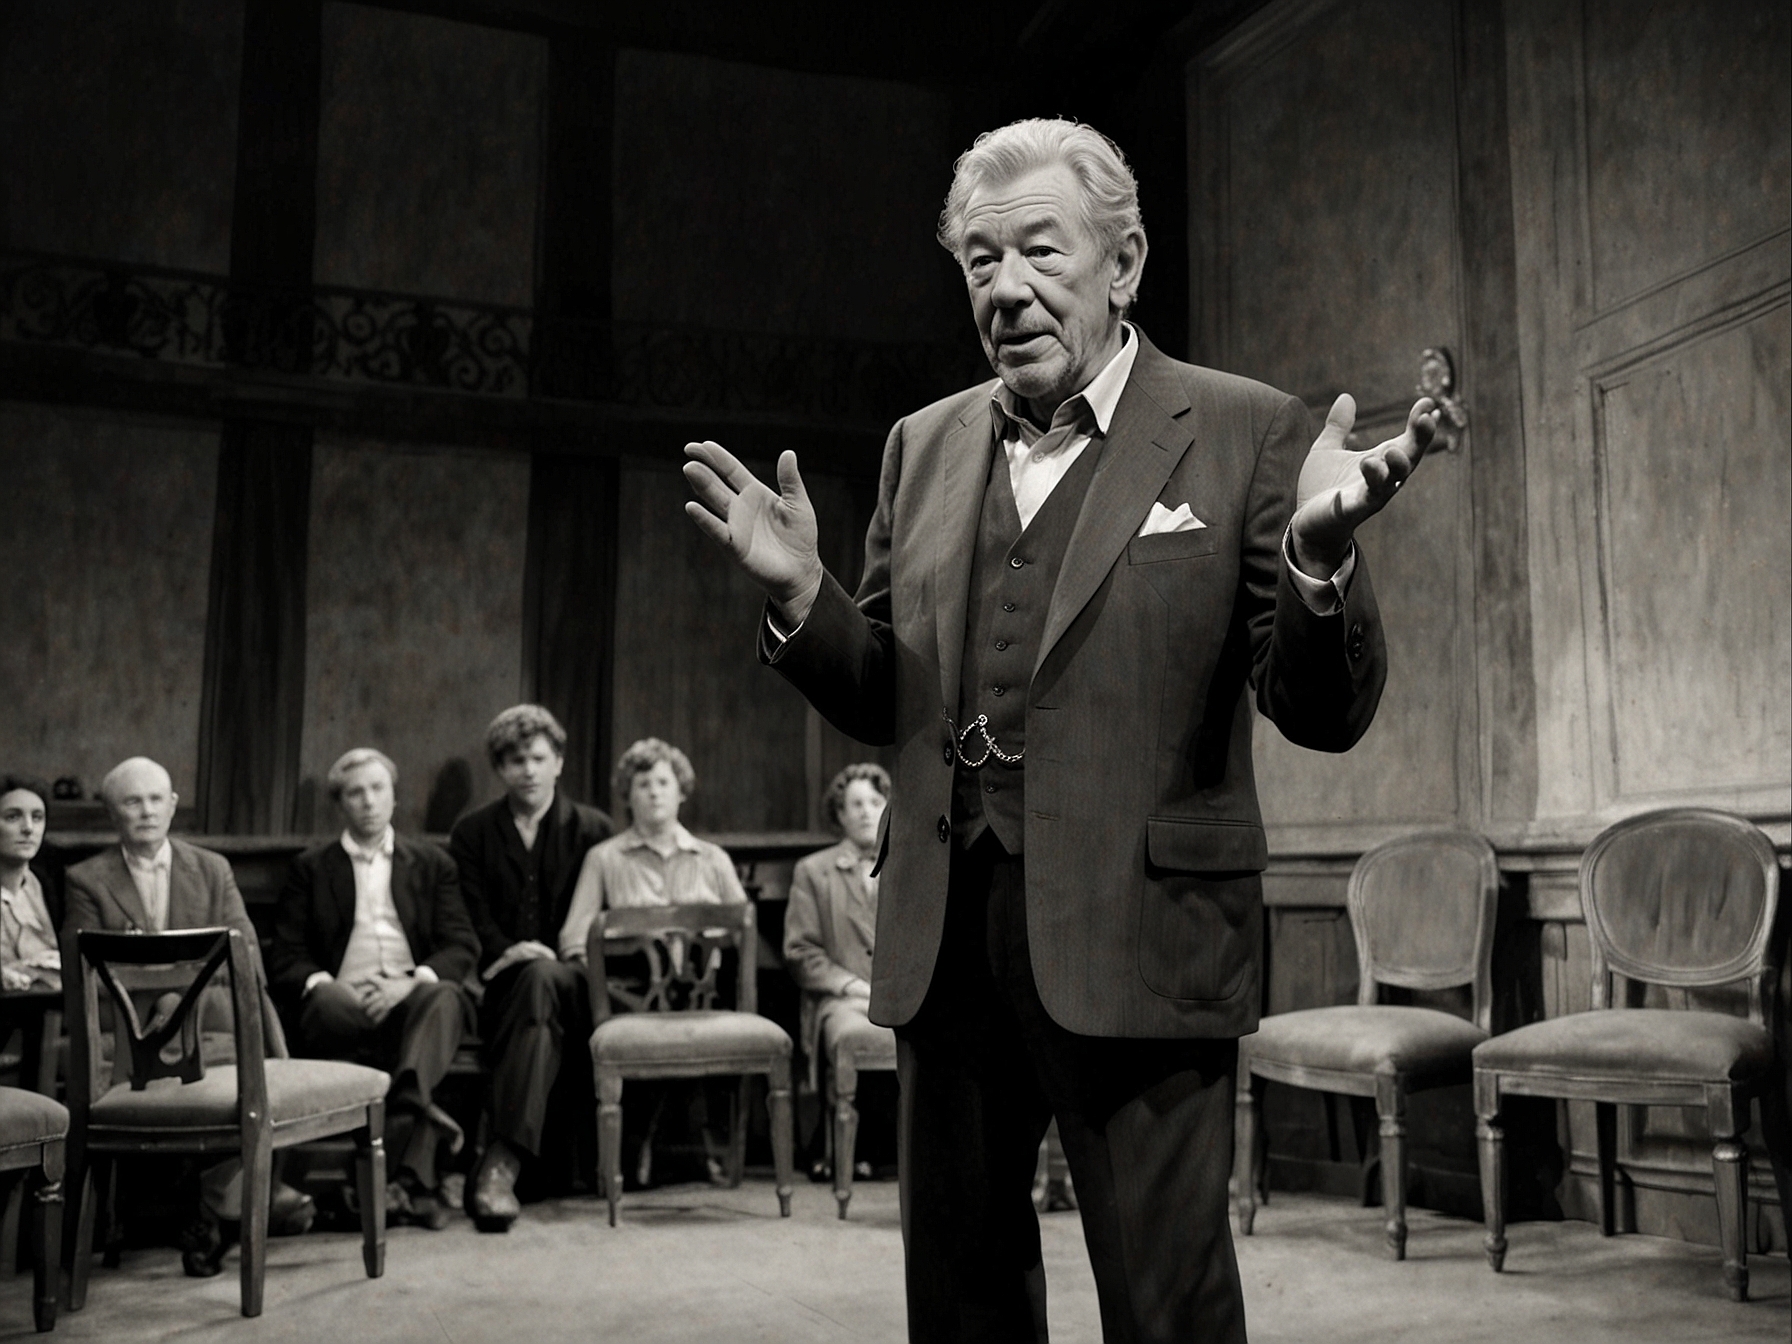 Sir Ian McKellen performing a passionate monologue on stage during 'Player Kings' in London's Duke of York's Theatre, moments before the unfortunate fall.